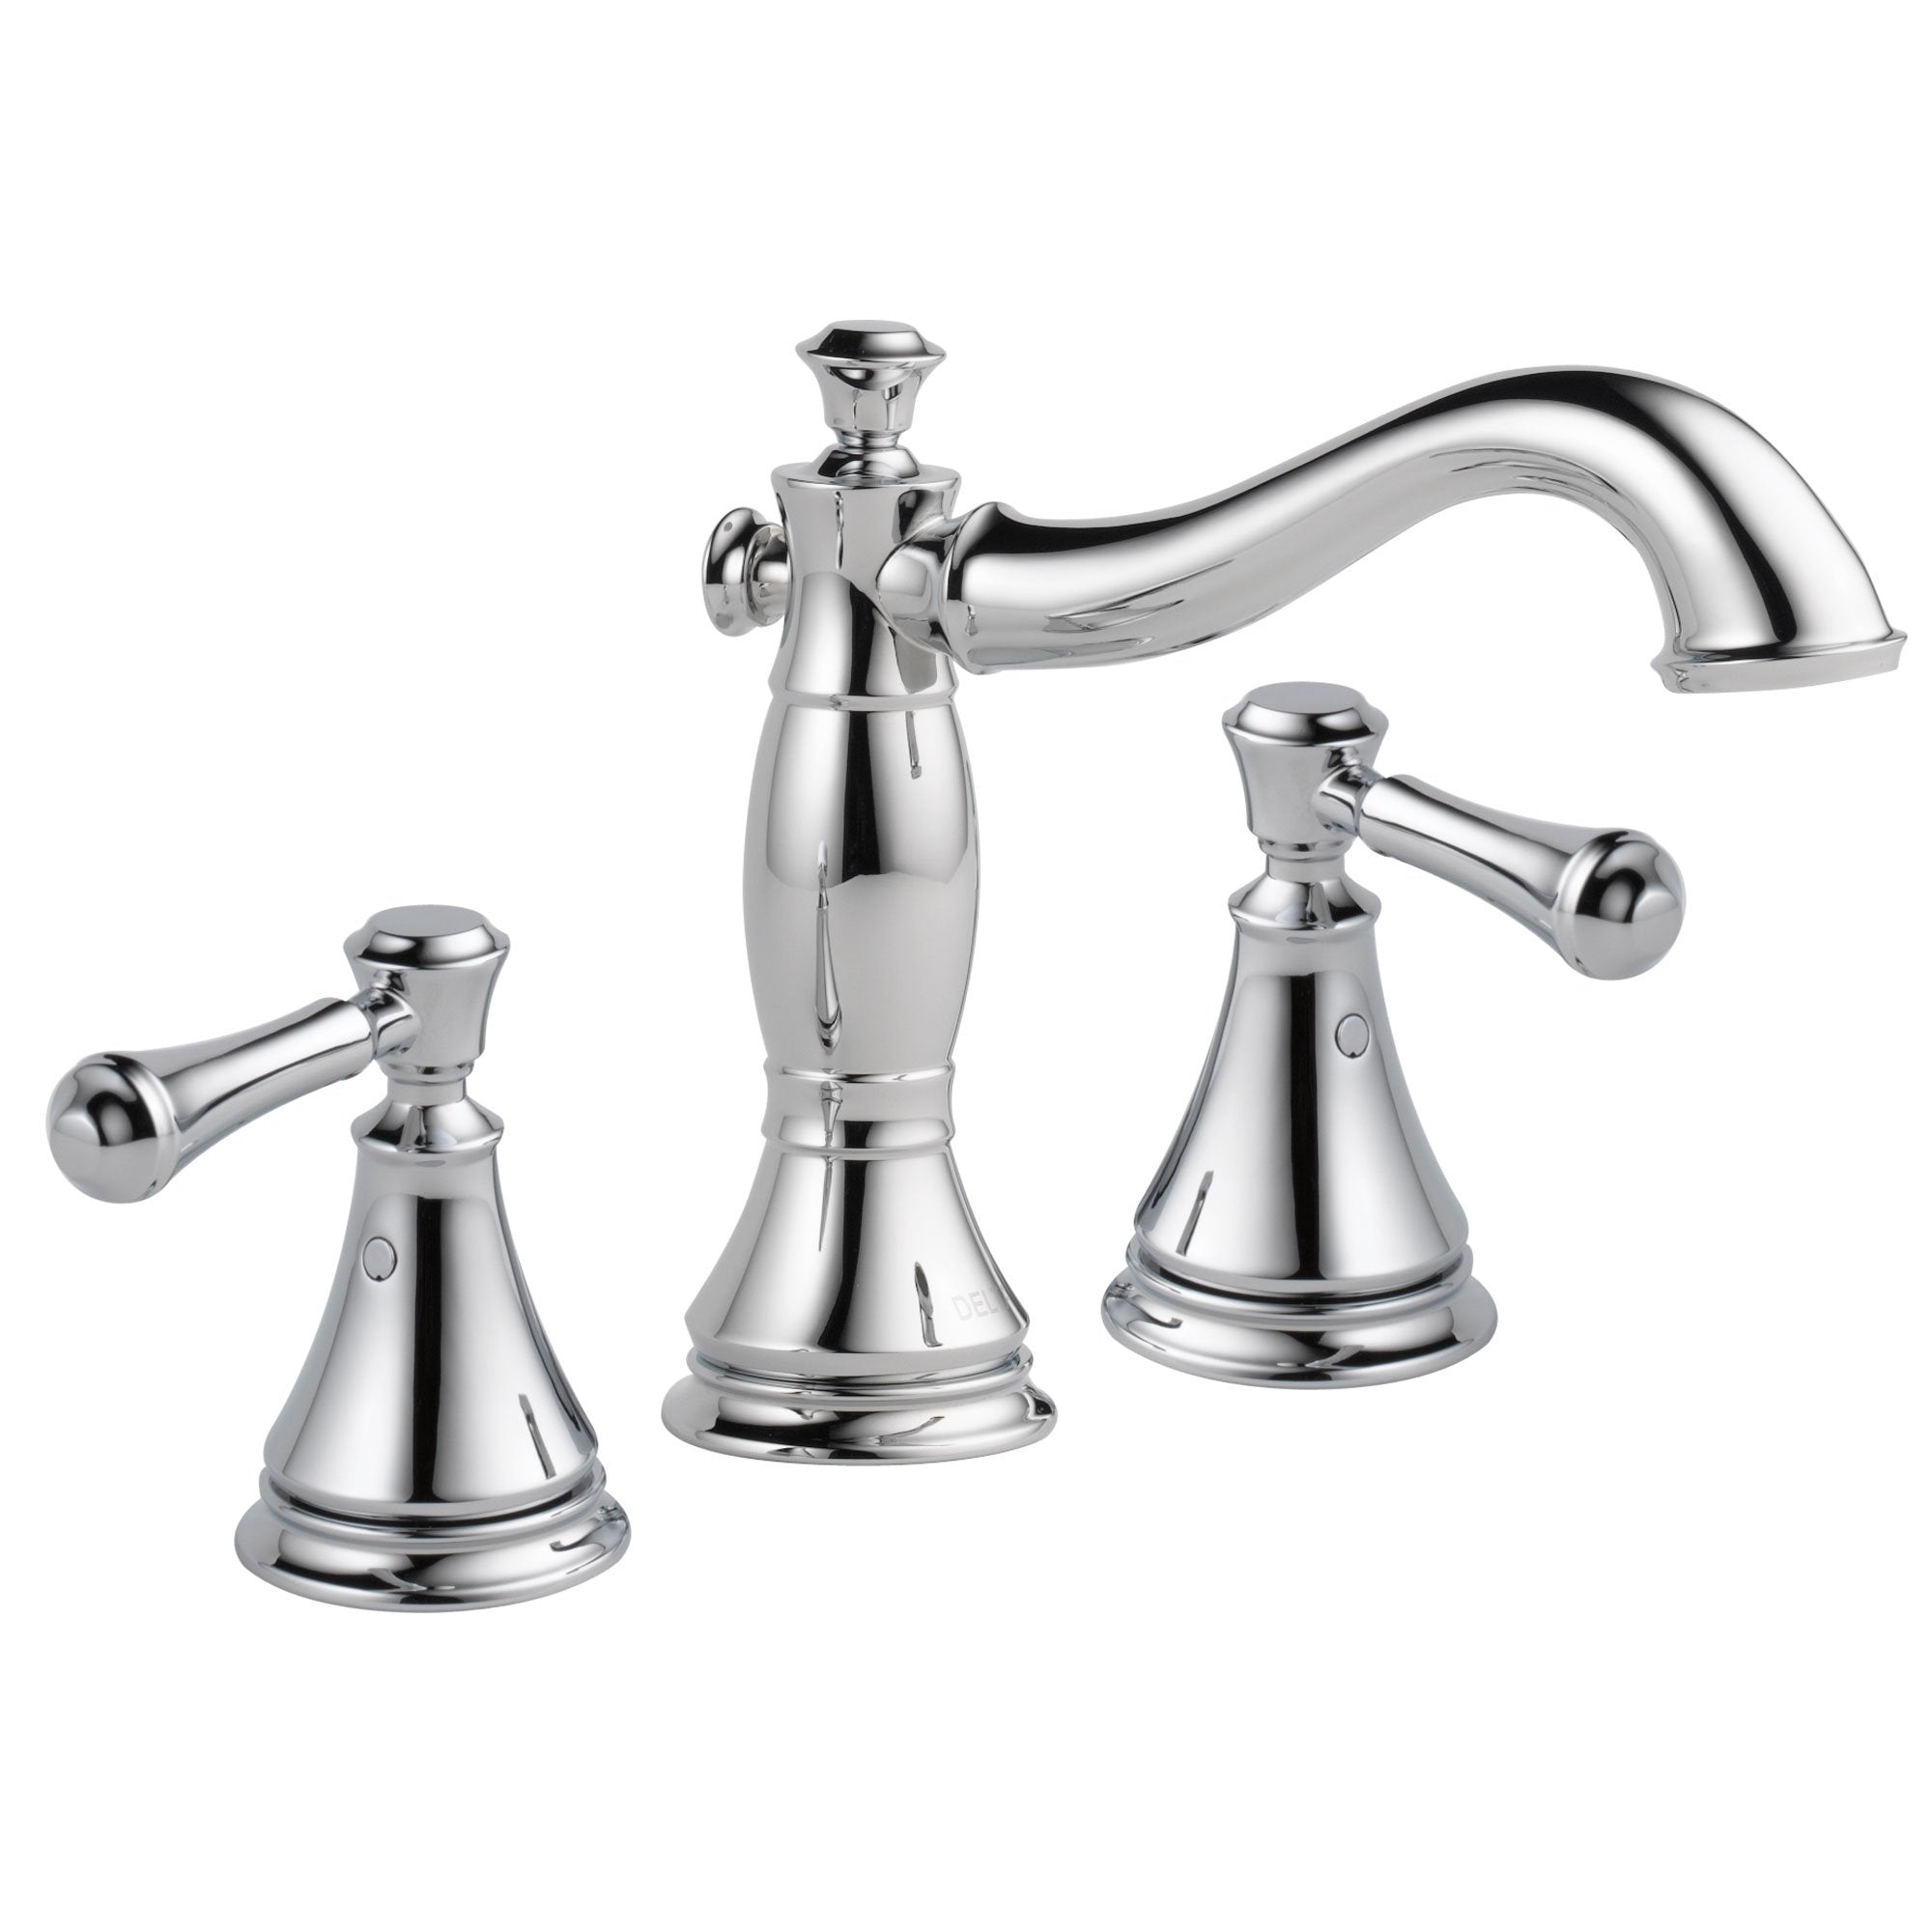 Delta Cassidy Collection Chrome Traditional Widespread Lavatory Bathroom Sink Faucet INCLUDES Two Lever Handles and Metal Pop-Up Drain D1781V